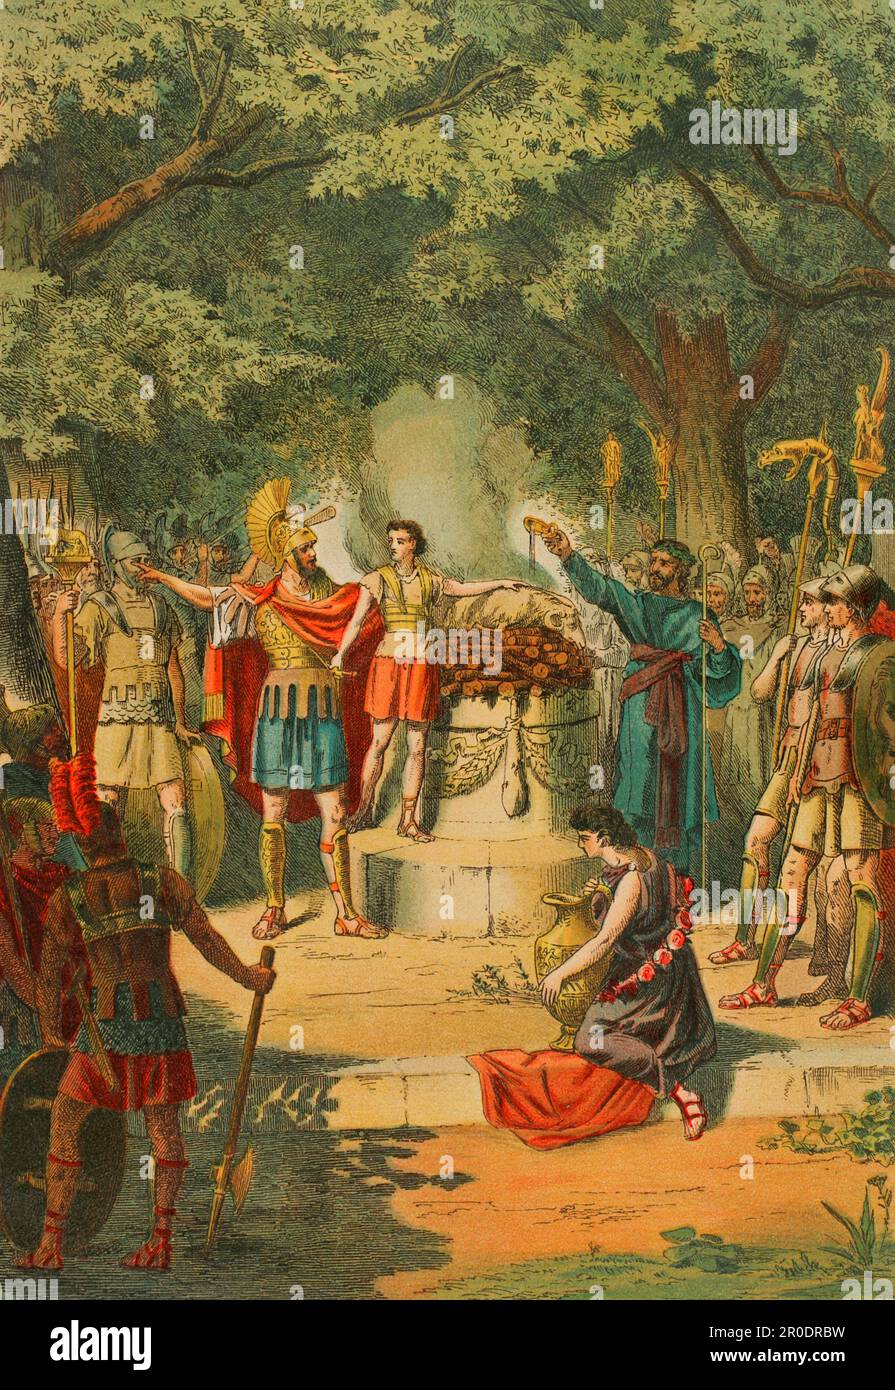 Hannibal Barca (247-183 BC). Carthaginian general and statesman. Hannibal in the Temple of Carthage with his father Hamilcar Barca, at the age of nine, taking an oath of eternal hatred of Rome by dipping his hands in the blood of the sacrificed animal. Chromolithography. 'Historia Universal', by César Cantú. Volume II, 1881. Stock Photo